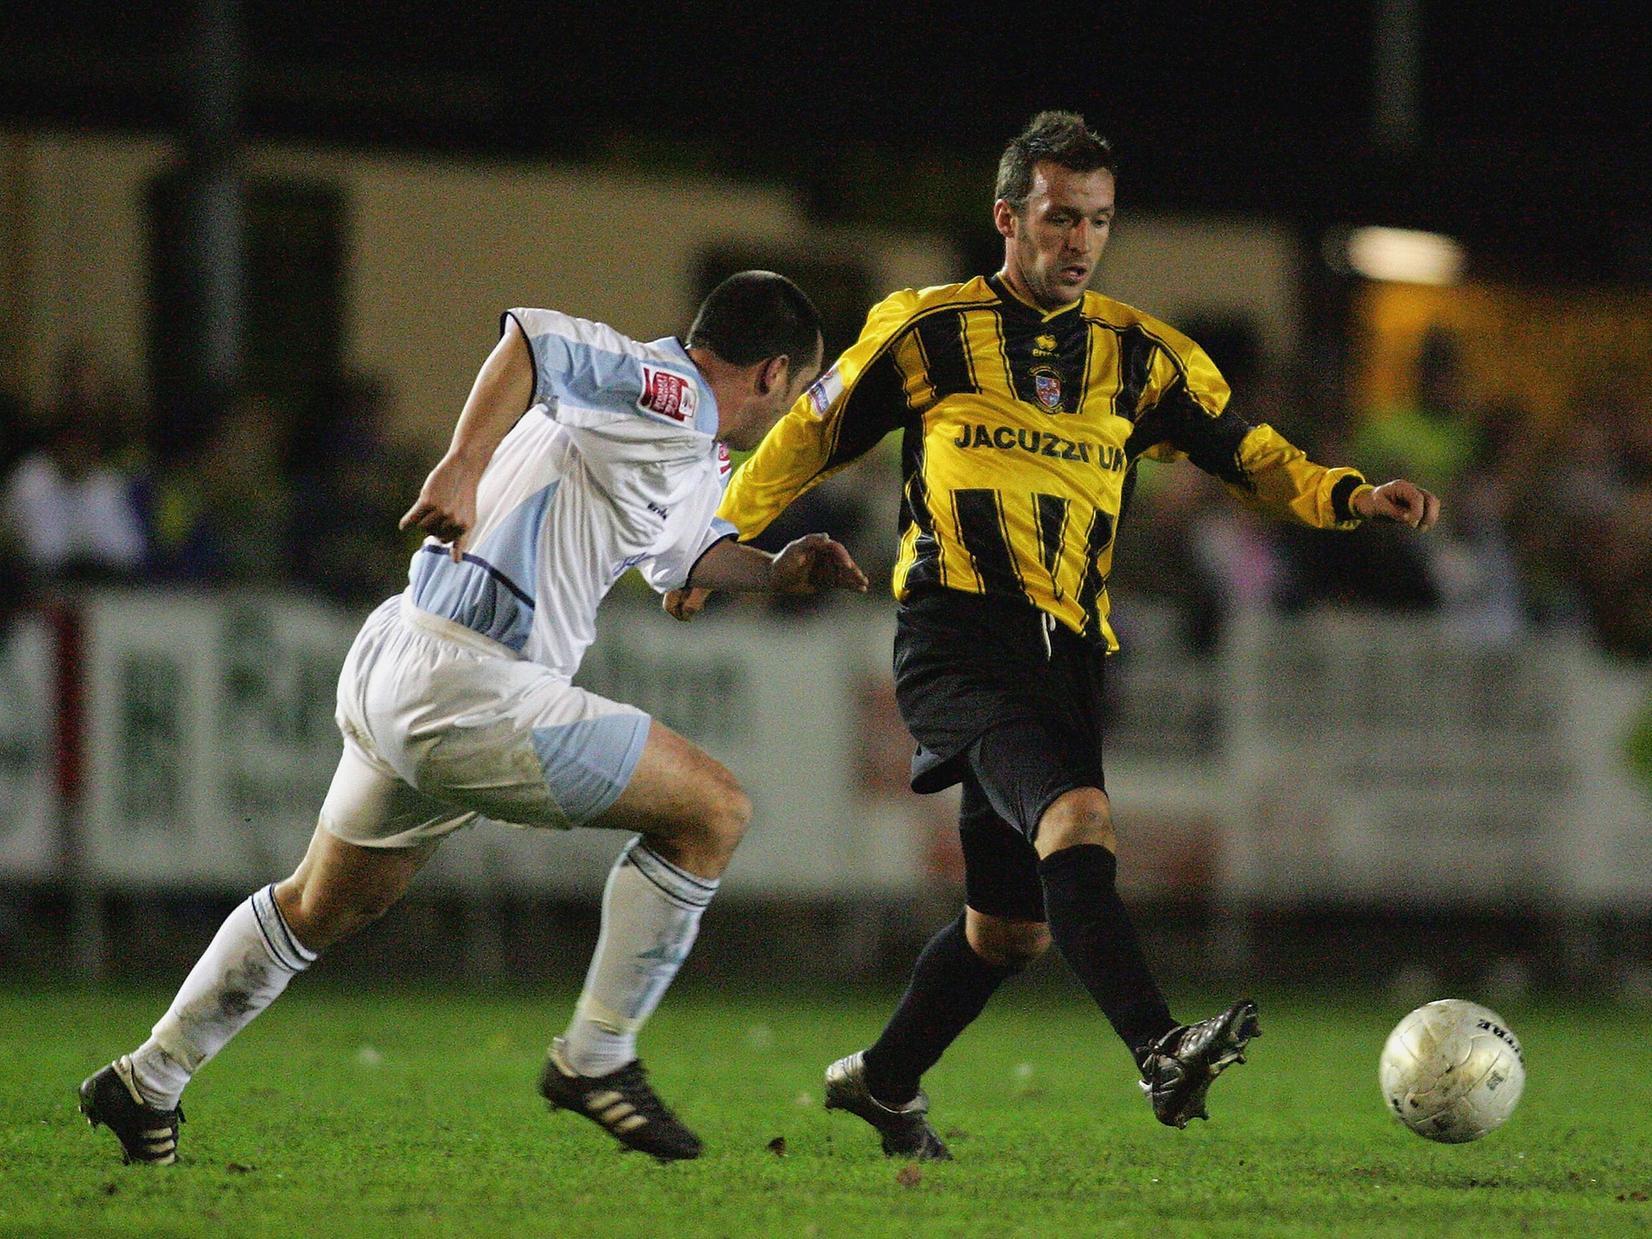 Roy Hunter on the ball for Town during their 0-0 replay draw with Torquay. The initial tie at Plainmoor had ended 1-1, Danny Holland the man on target for Town.